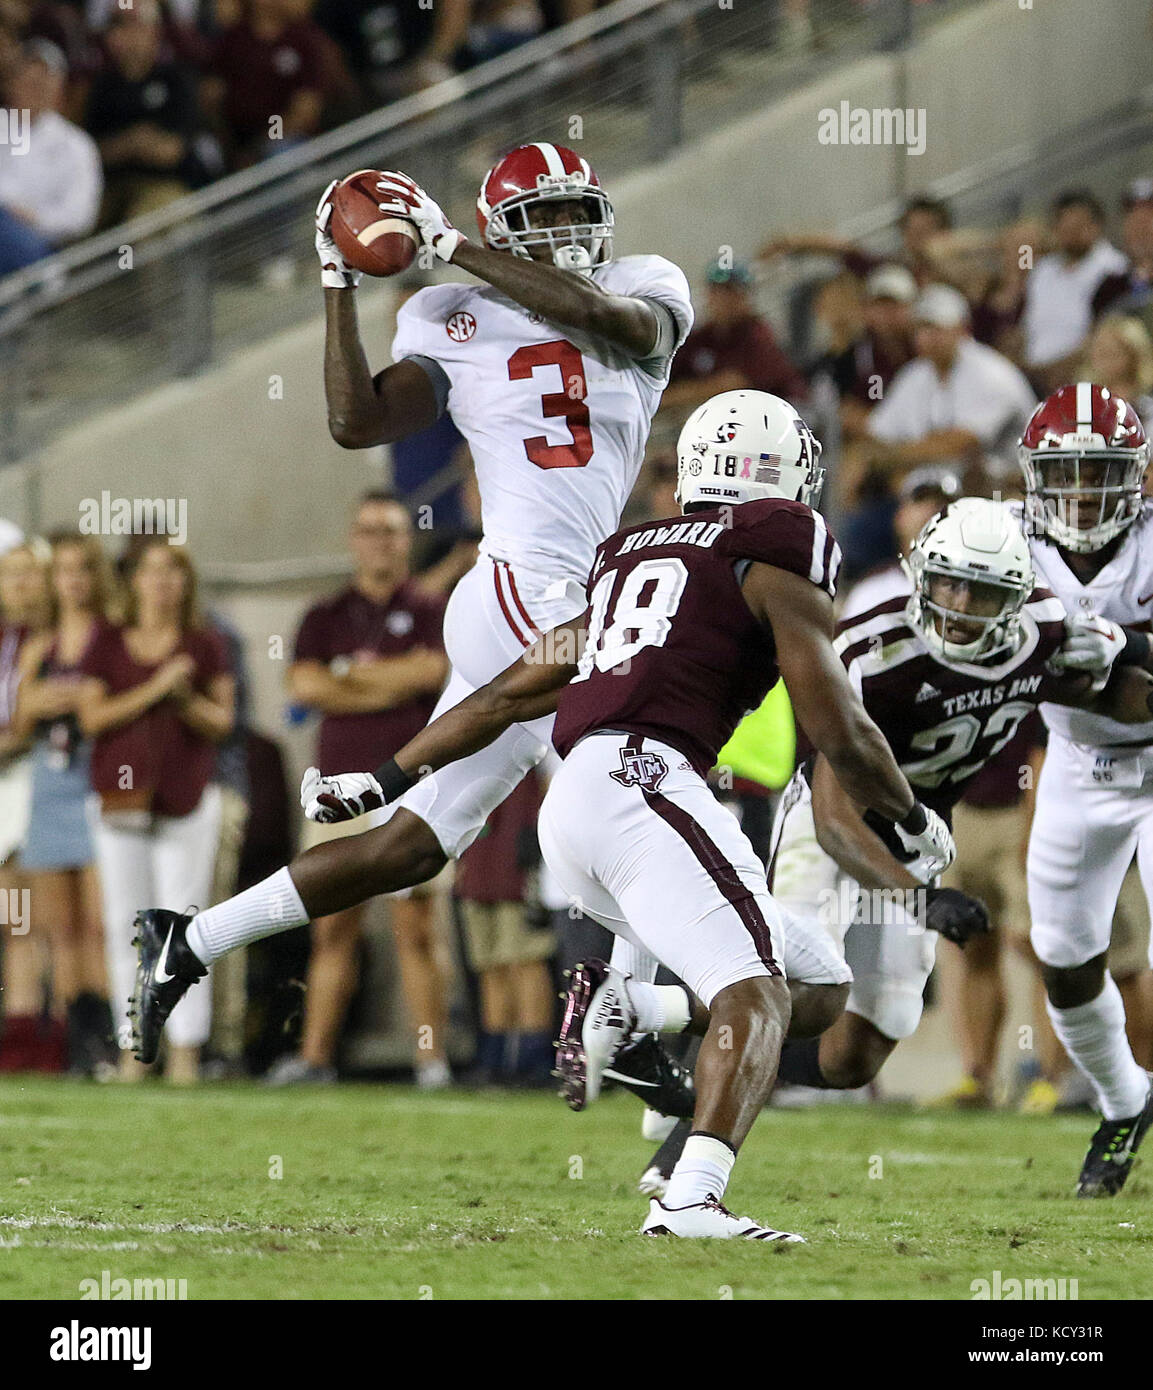 October 6, 2017: Alabama Crimson Tide wide receiver Calvin Ridley (3) catches a pass in the second quarter during the NCAA football game between the Alabama Crimson Tide and the Texas A&M Aggies at Kyle Field in College Station, TX; John Glaser/CSM. Stock Photo